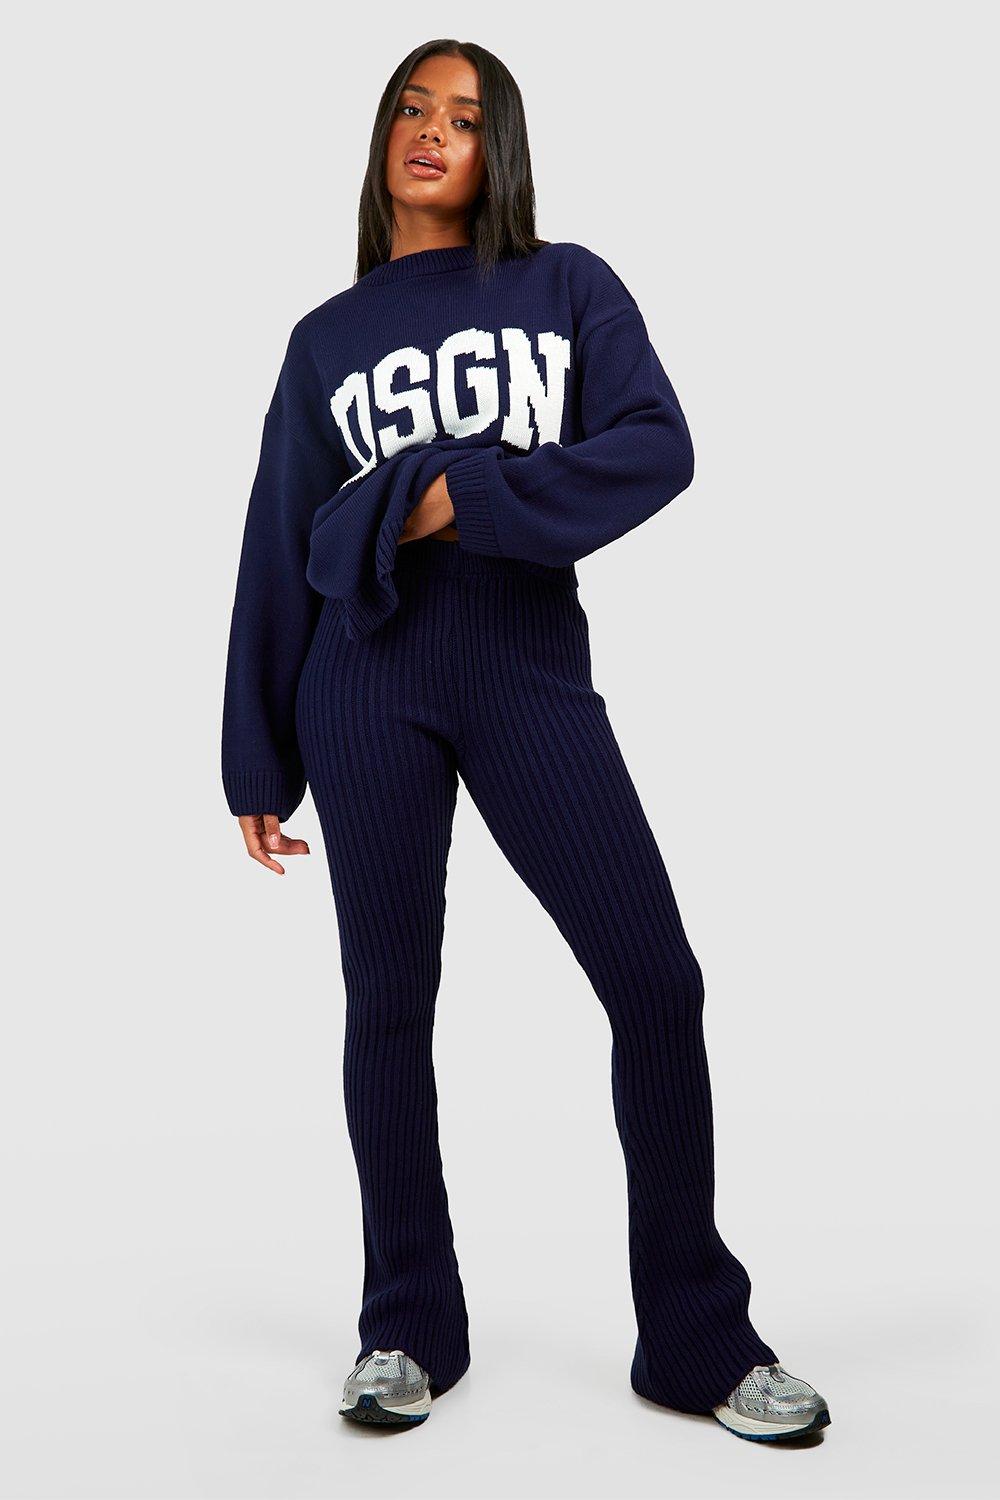 Femme Luxe kitted oversized crop top and legging set in navy